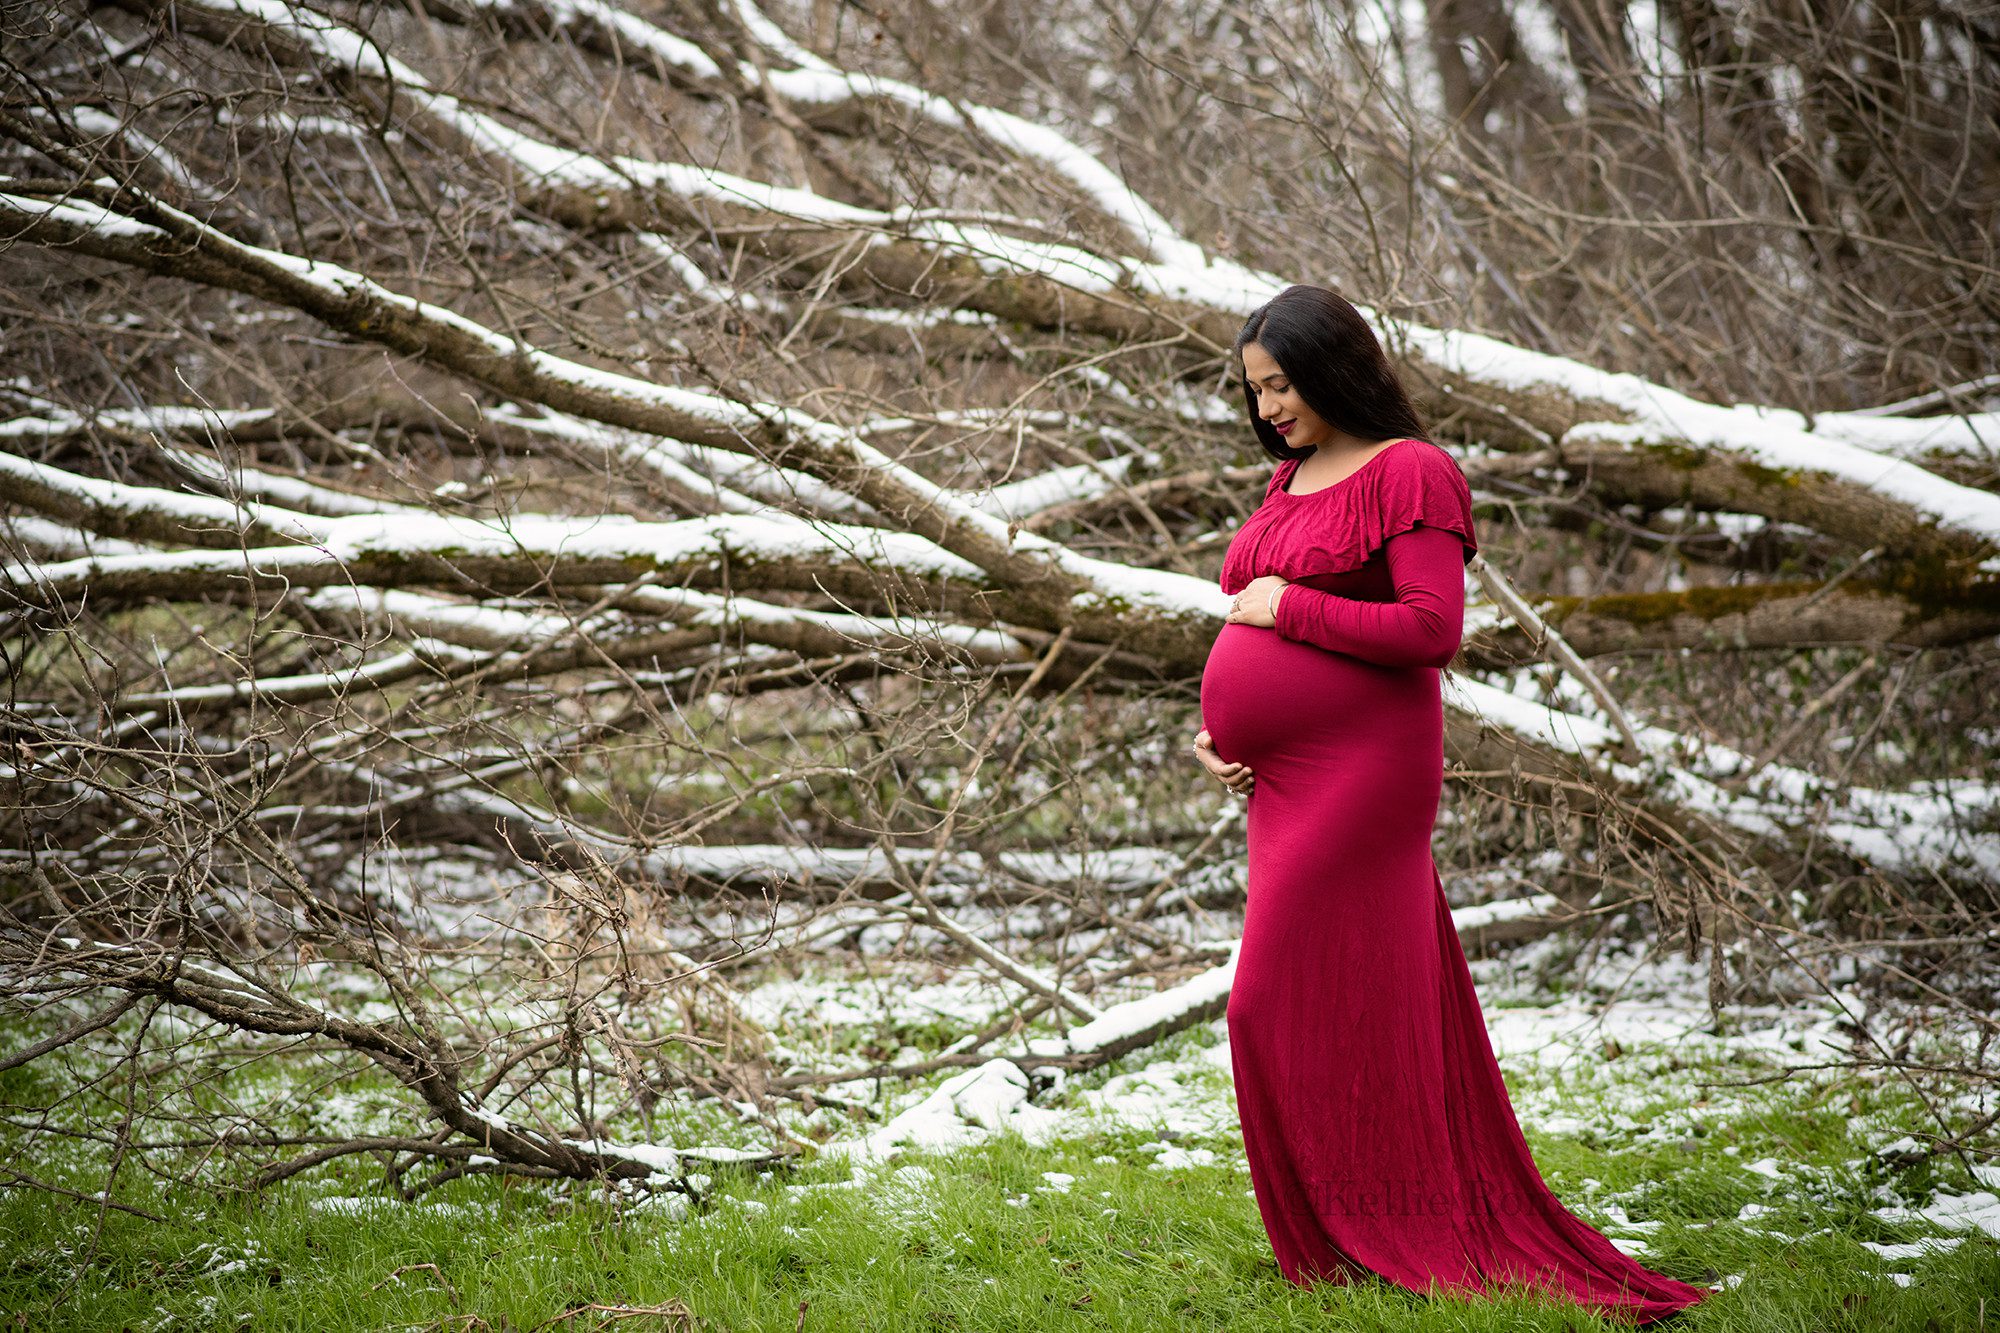 maternity in the snow a women standing in a milwaukee county park wearing a red gown is pregnant and holding her belly she's in front of a large fallen tree with huge branches with snow resting on them the woman has dark brown hair and is looking down at her belly